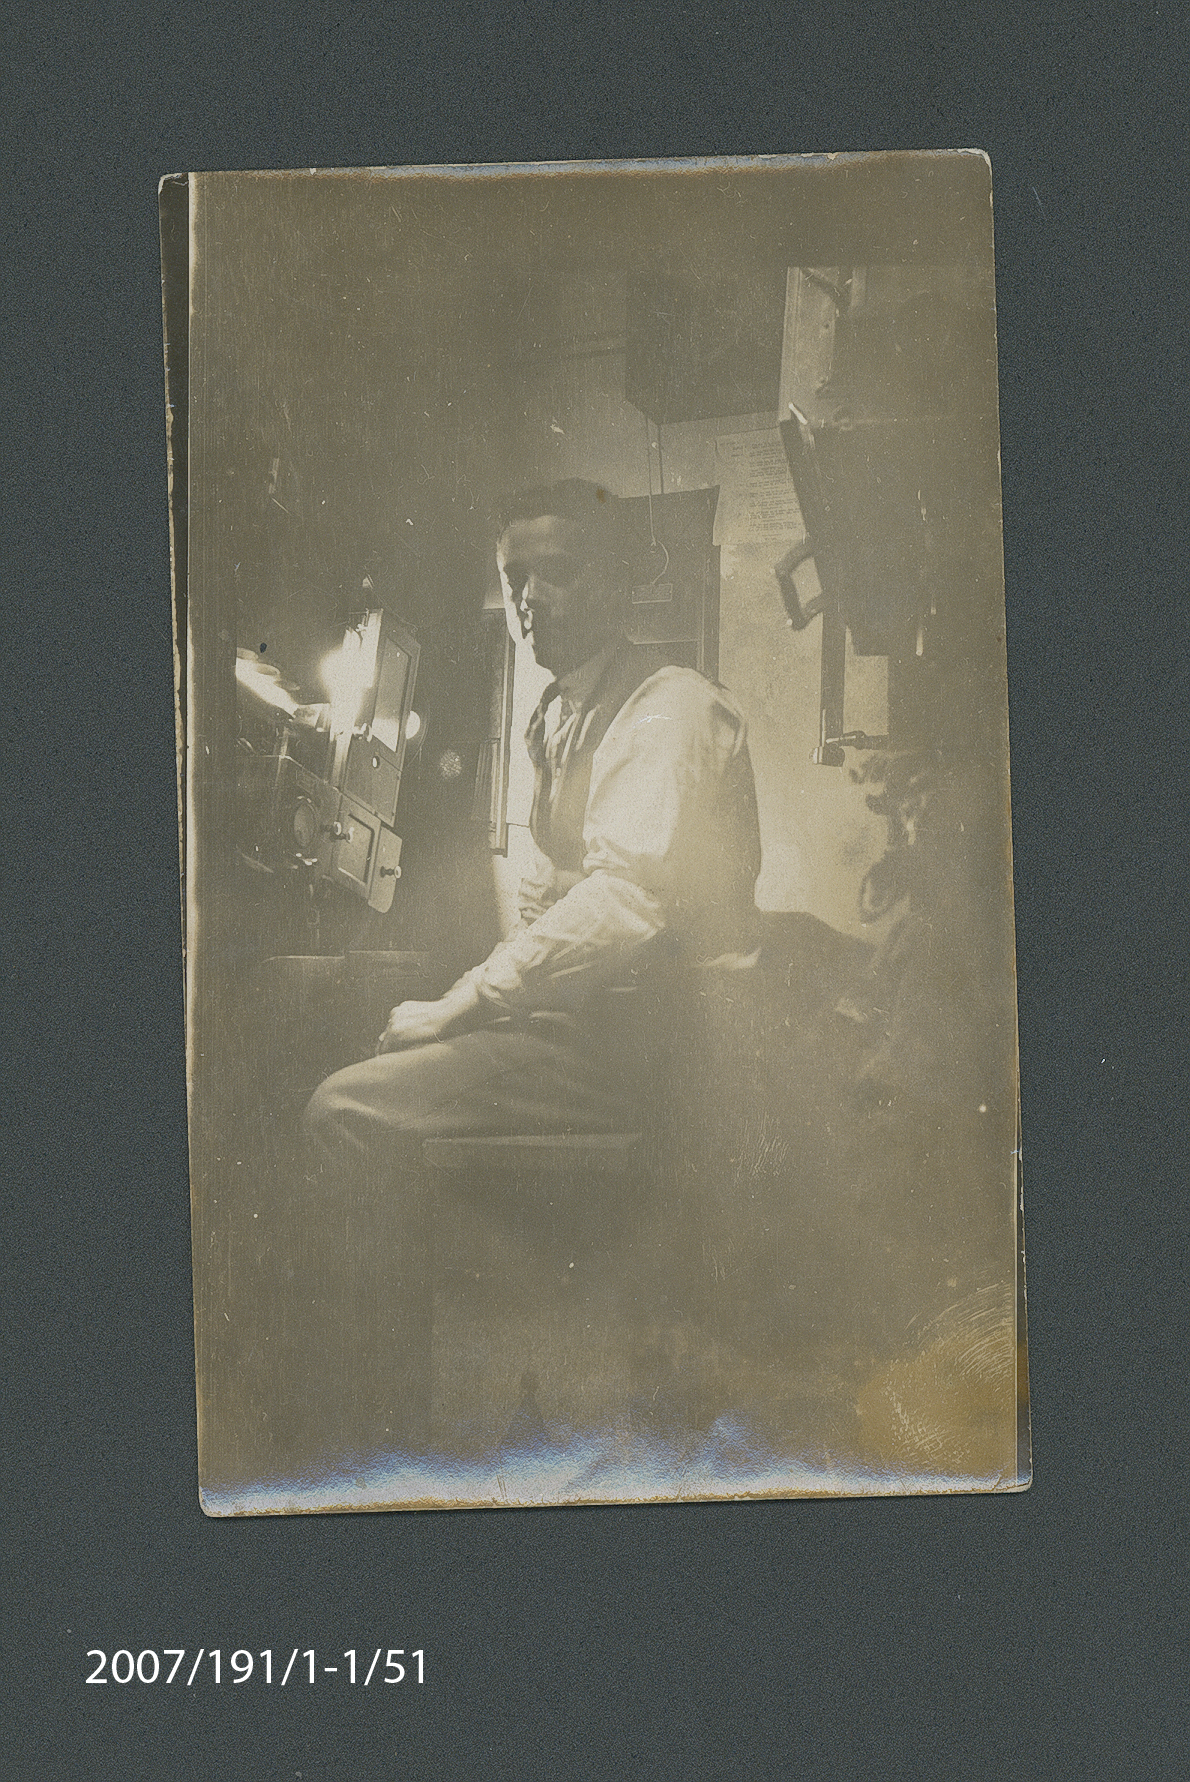 Photograph of Stan Allan seated in projection room at Haymarket Theatre, Sydney